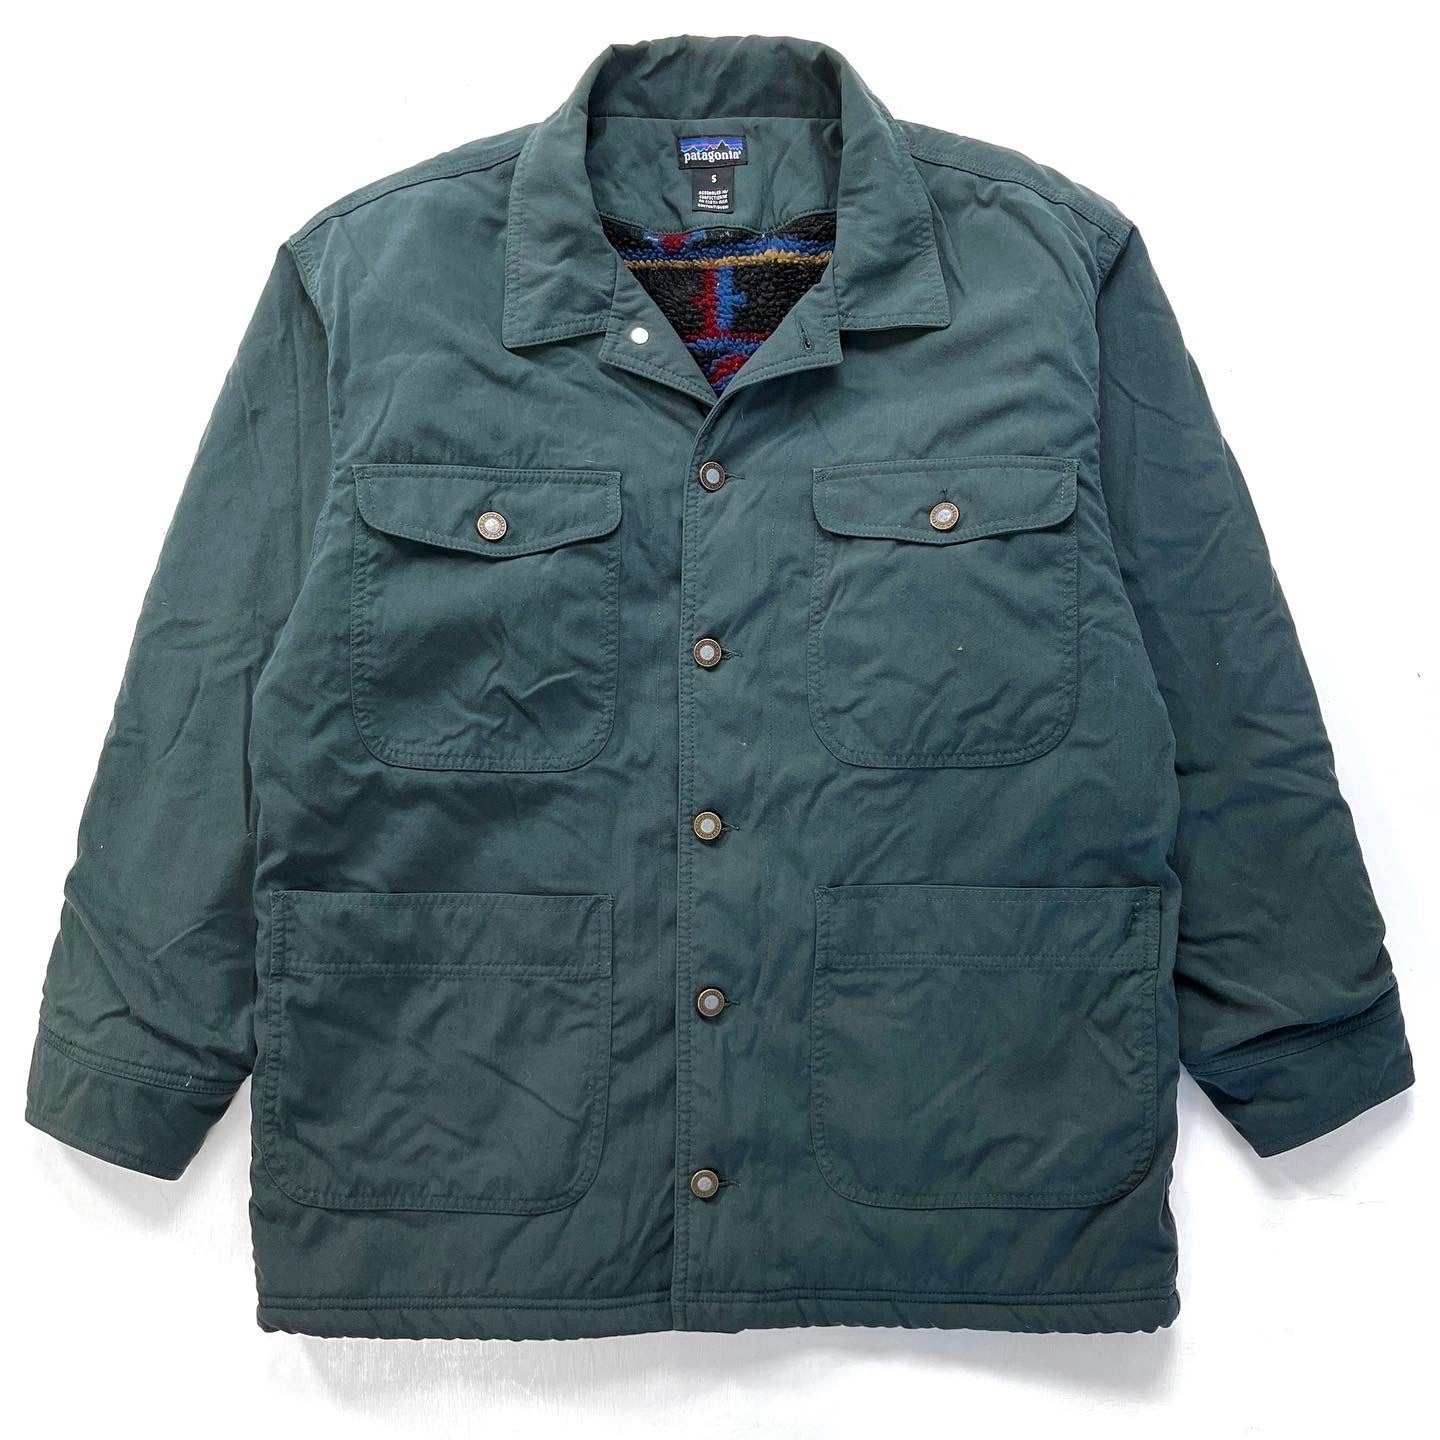 1995 Patagonia Pile-Lined Canvas Nuevo Range Coat, Spruce (S/M)